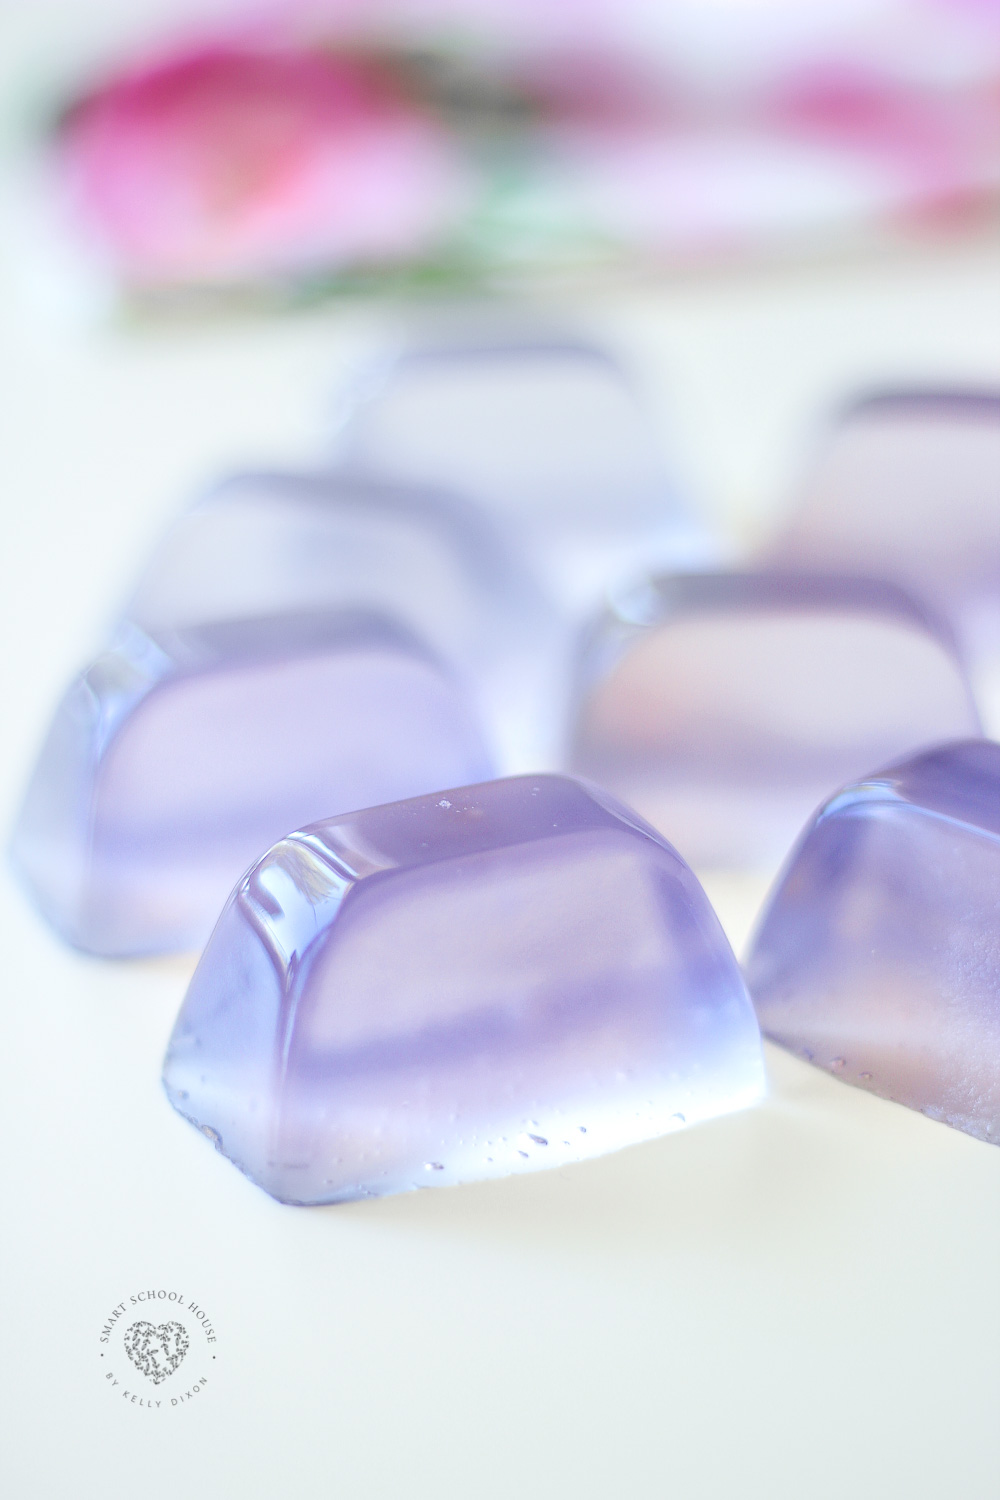 LAVENDER SOAP JELLIES! Wiggly, jiggly, foaming soap cubes that smell SO GOOD! Can be used in the bath, shower, or as hand soap. These are fun to make and even fun to use! #SoapJellies #lavender #BathJellies